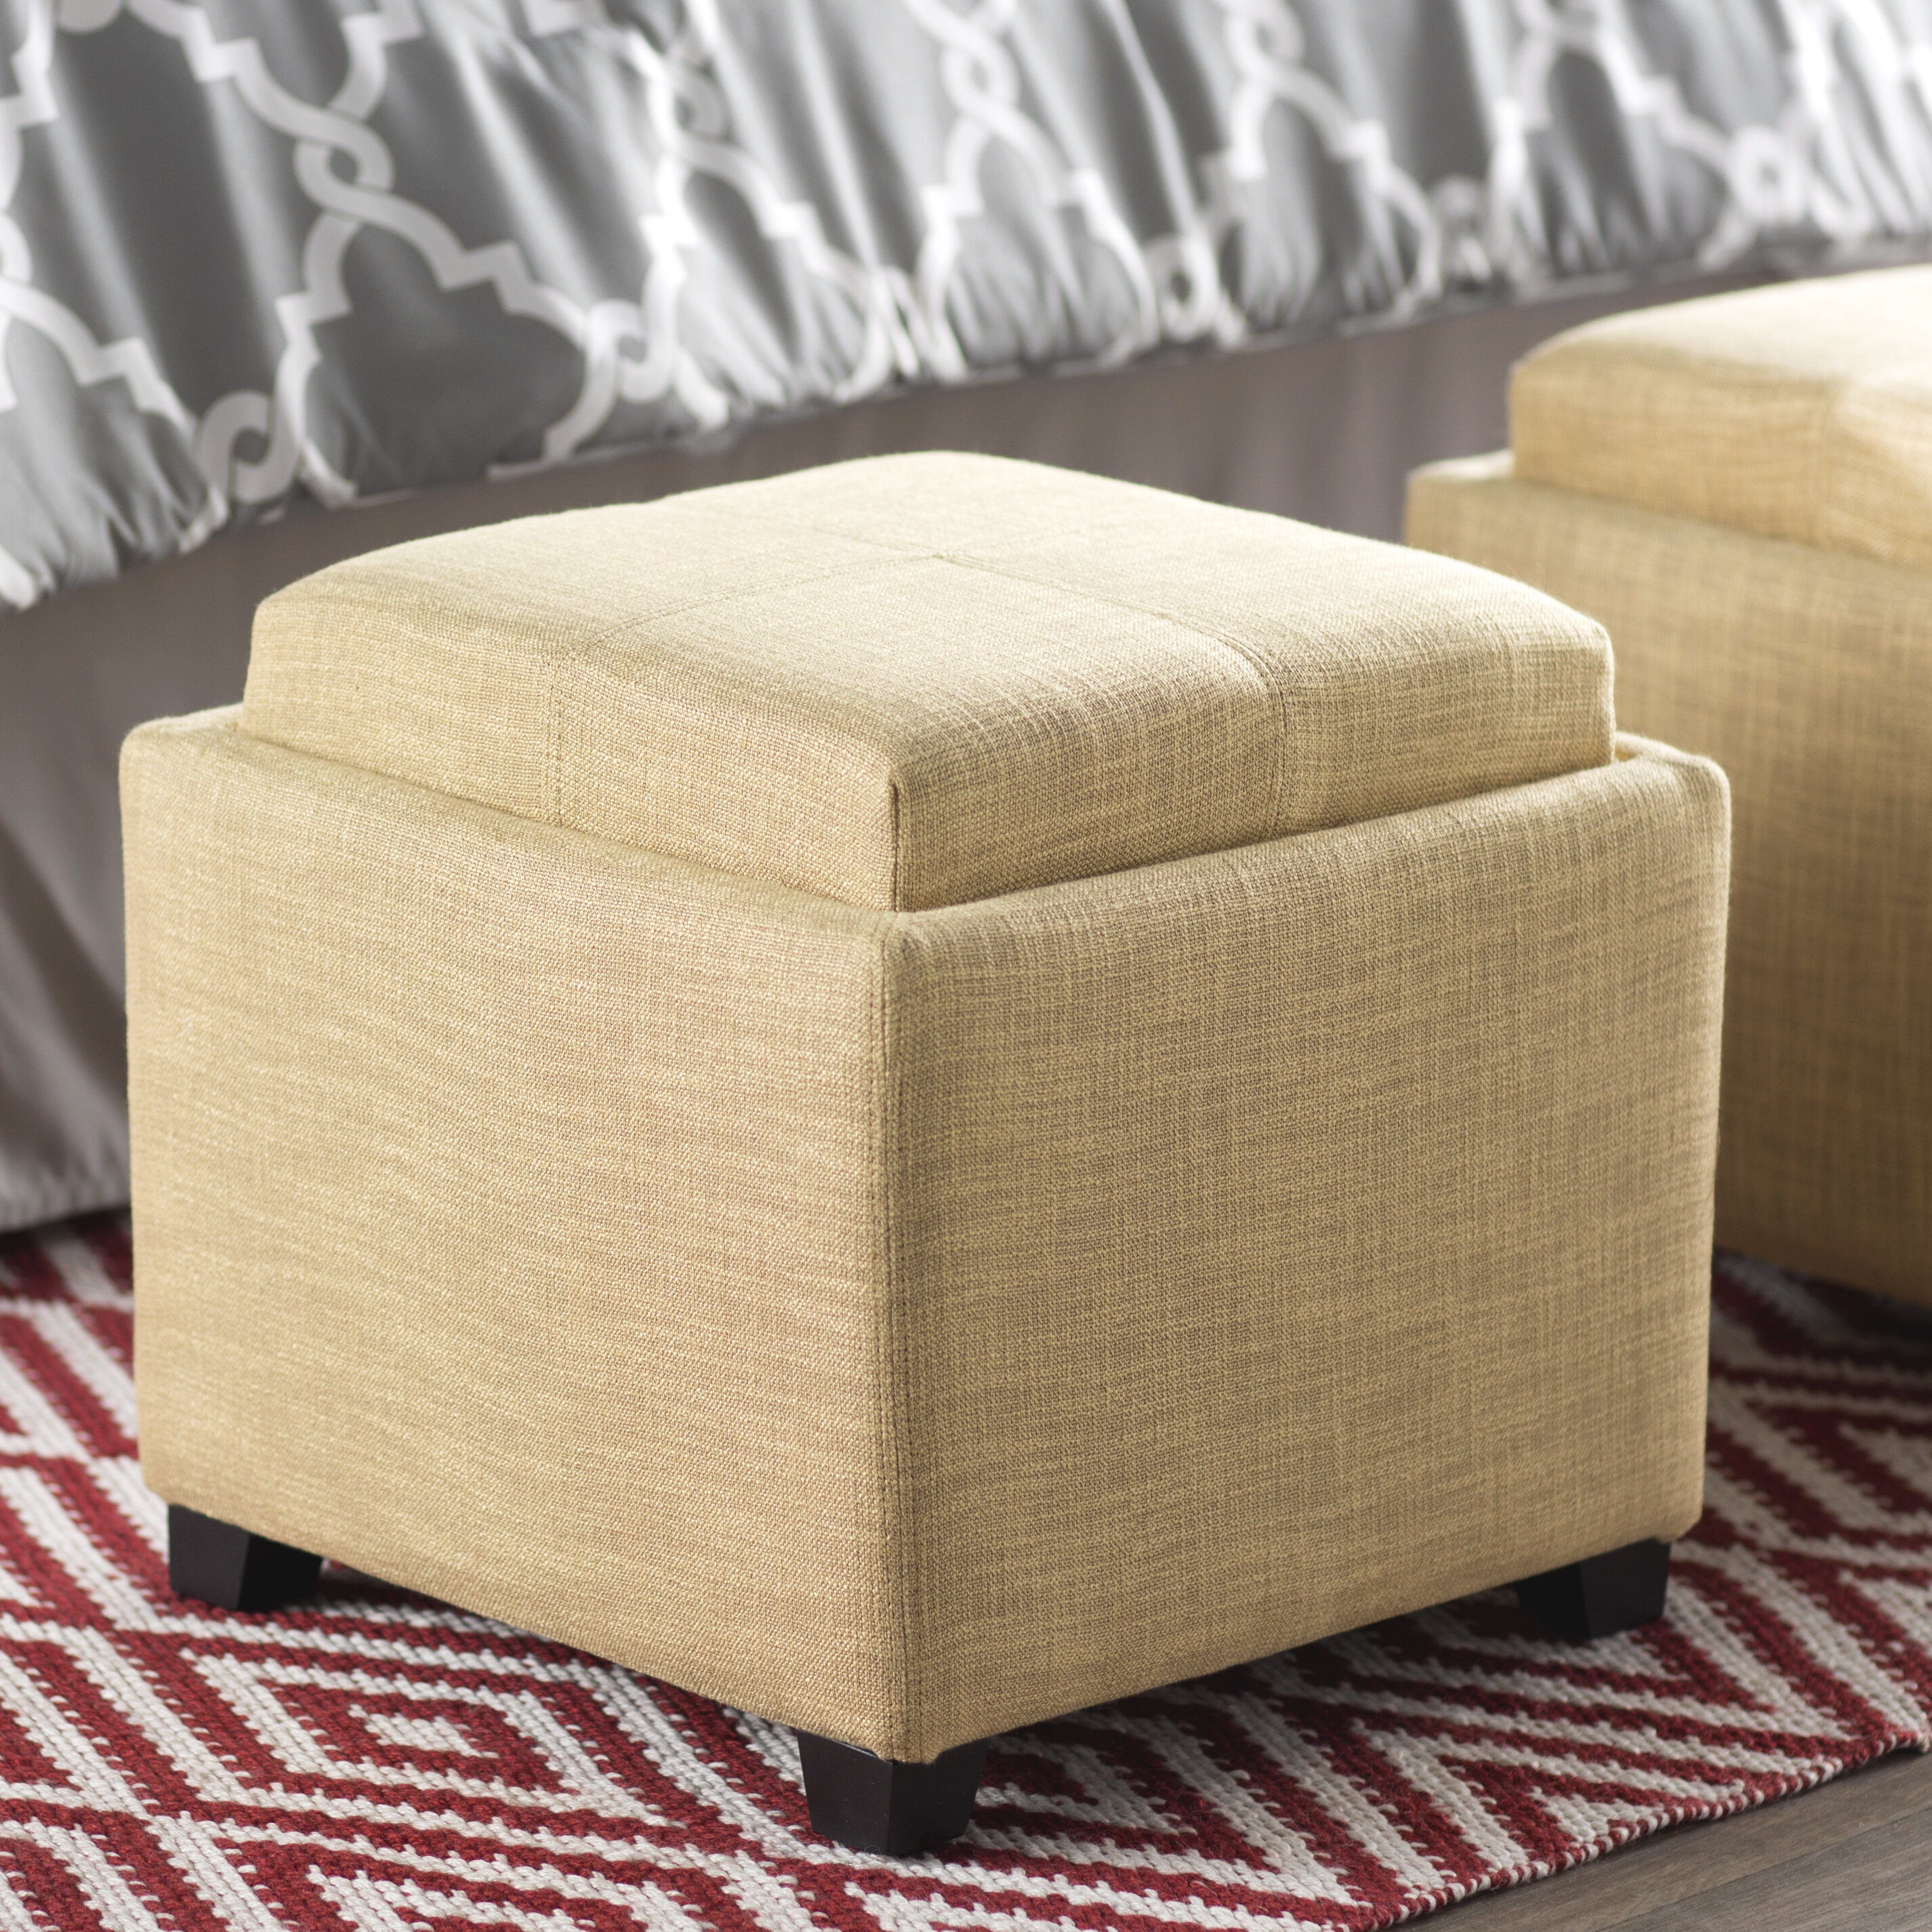 40x40x40 Beig Relaxdays Ottoman Box Storage Cube with Removable Livarno living 